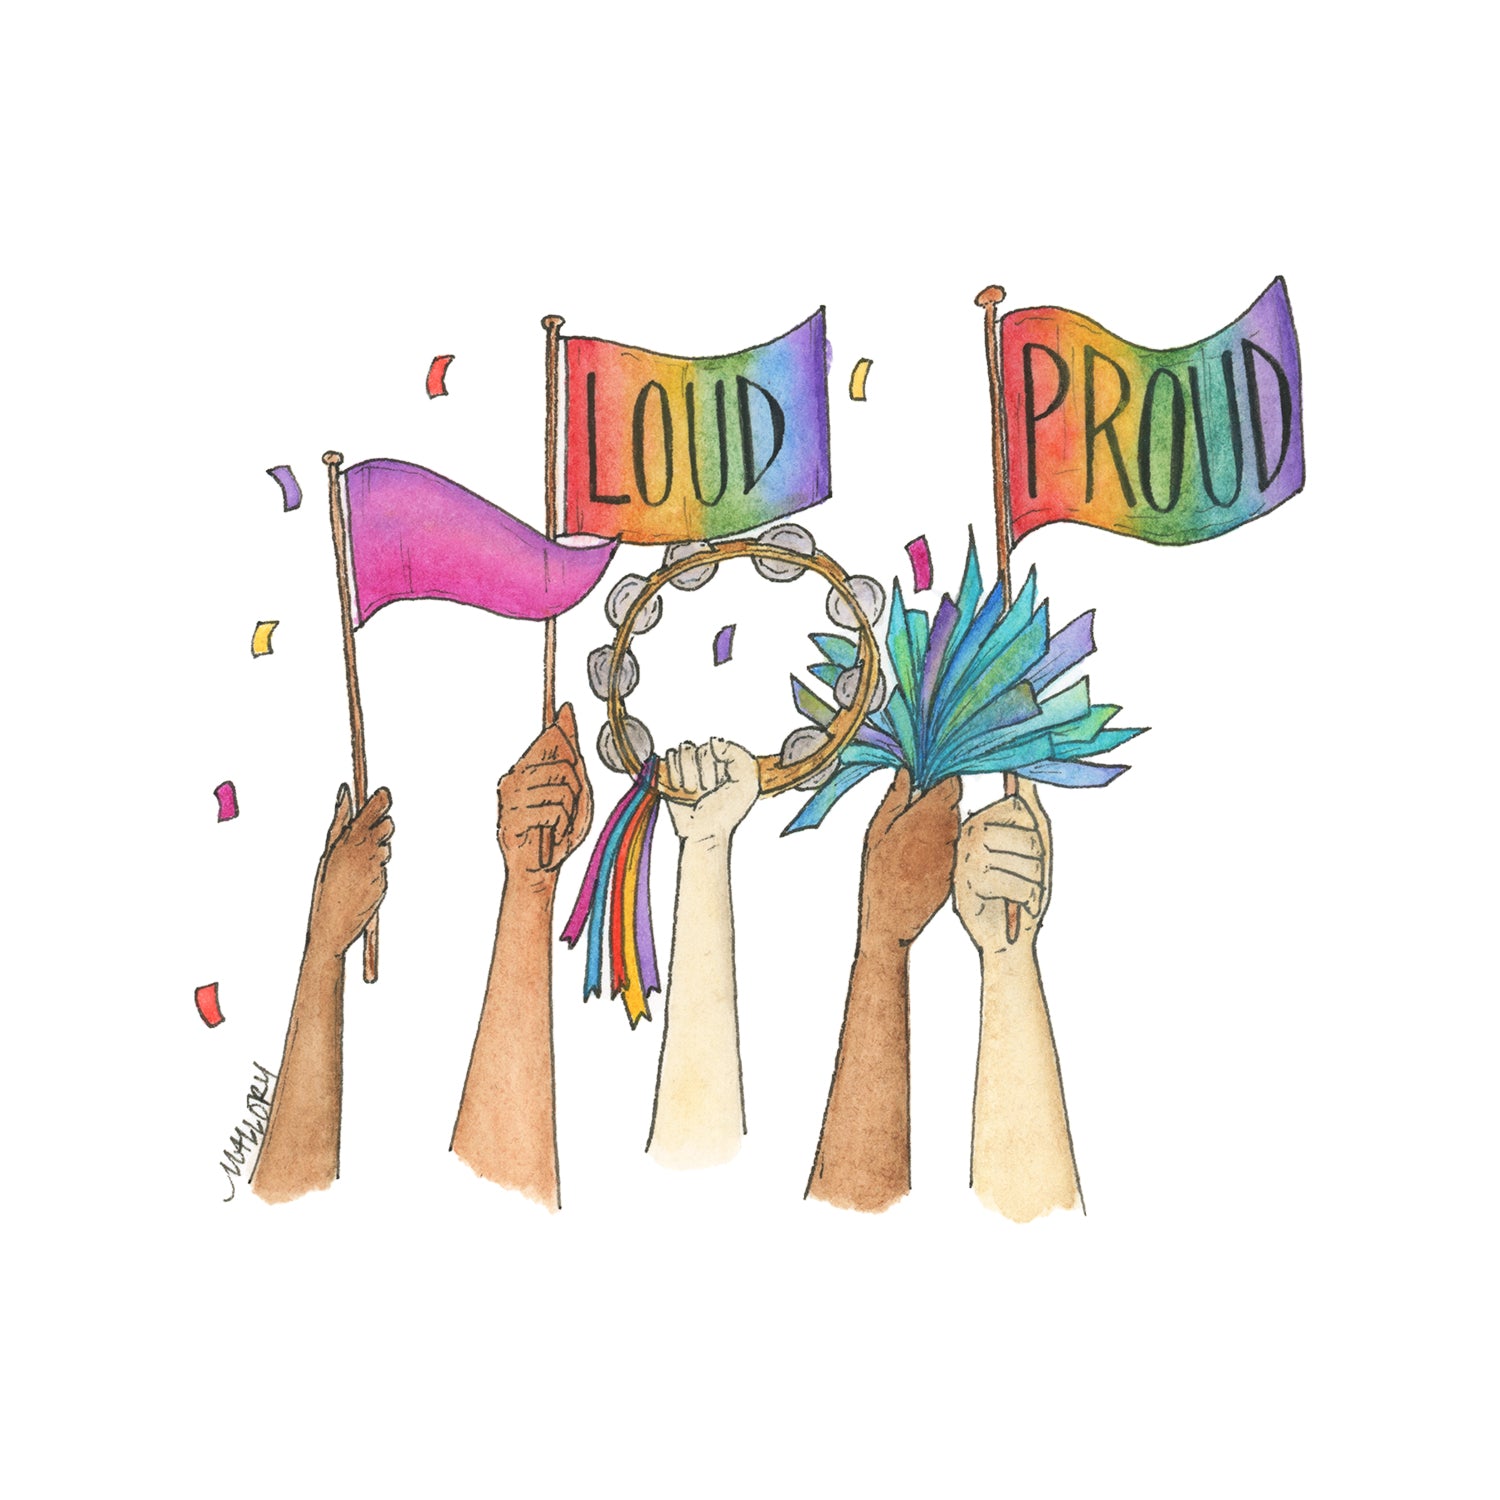 Image depicts a fun Pride Parade card with hands up in the air holding Pride flags, a tambourine and blue pom poms. The words, "Loud" and "Proud" are lettered on the pride flags.